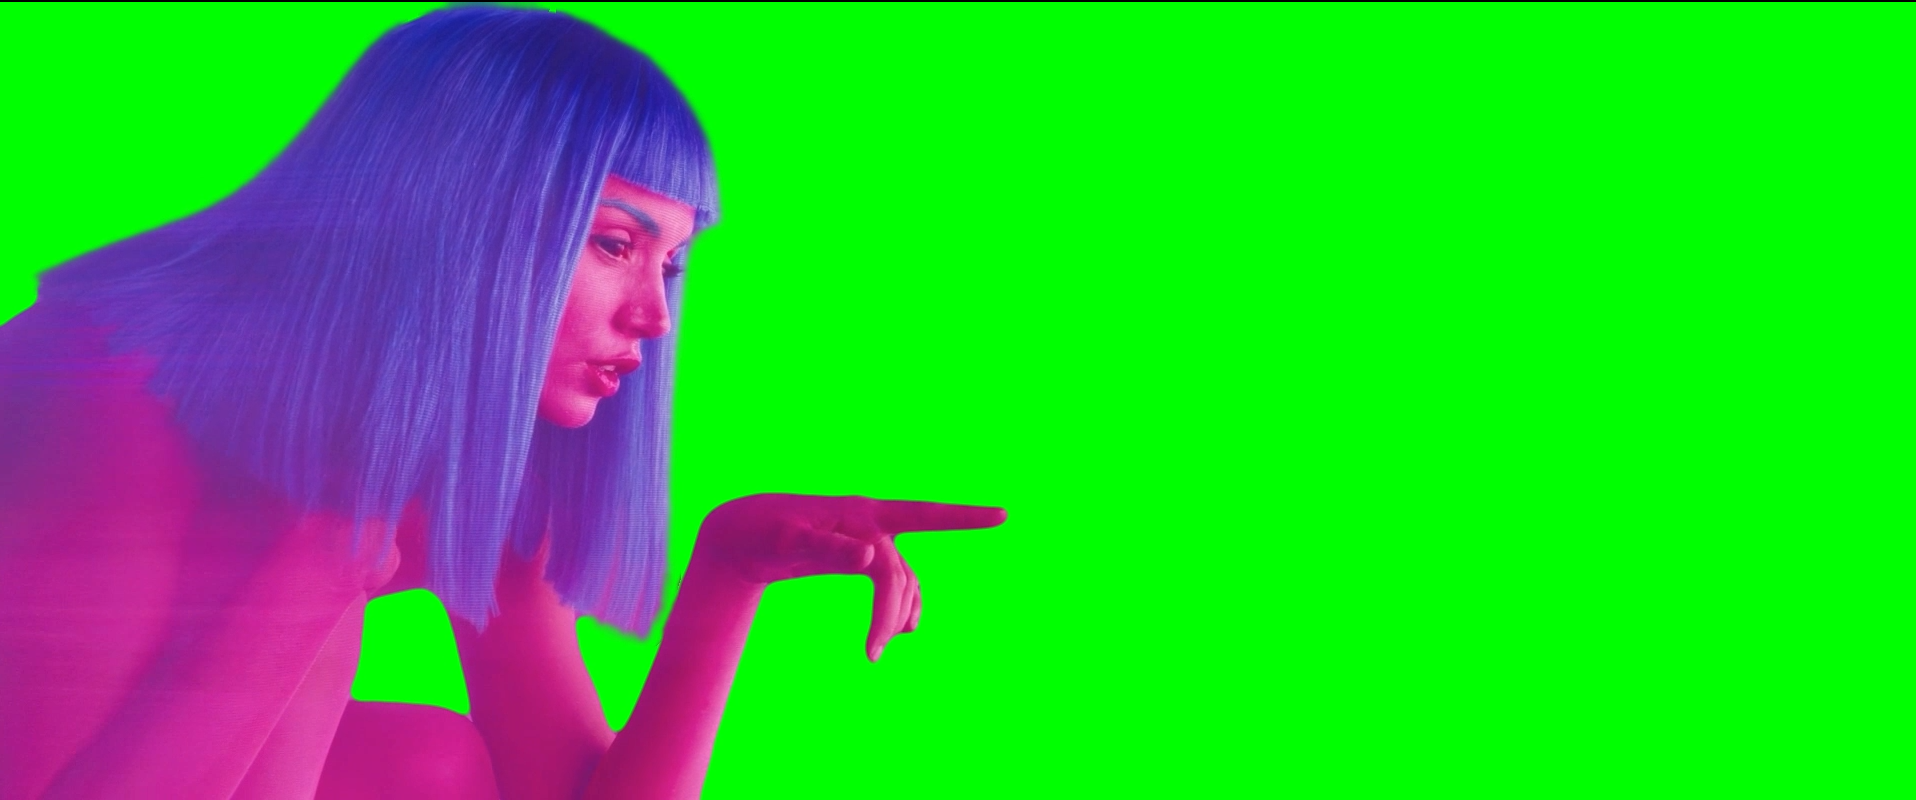 You Look Lonely, I Can Fix That - Blade Runner 2049 - Ana de Armas (Green Screen)